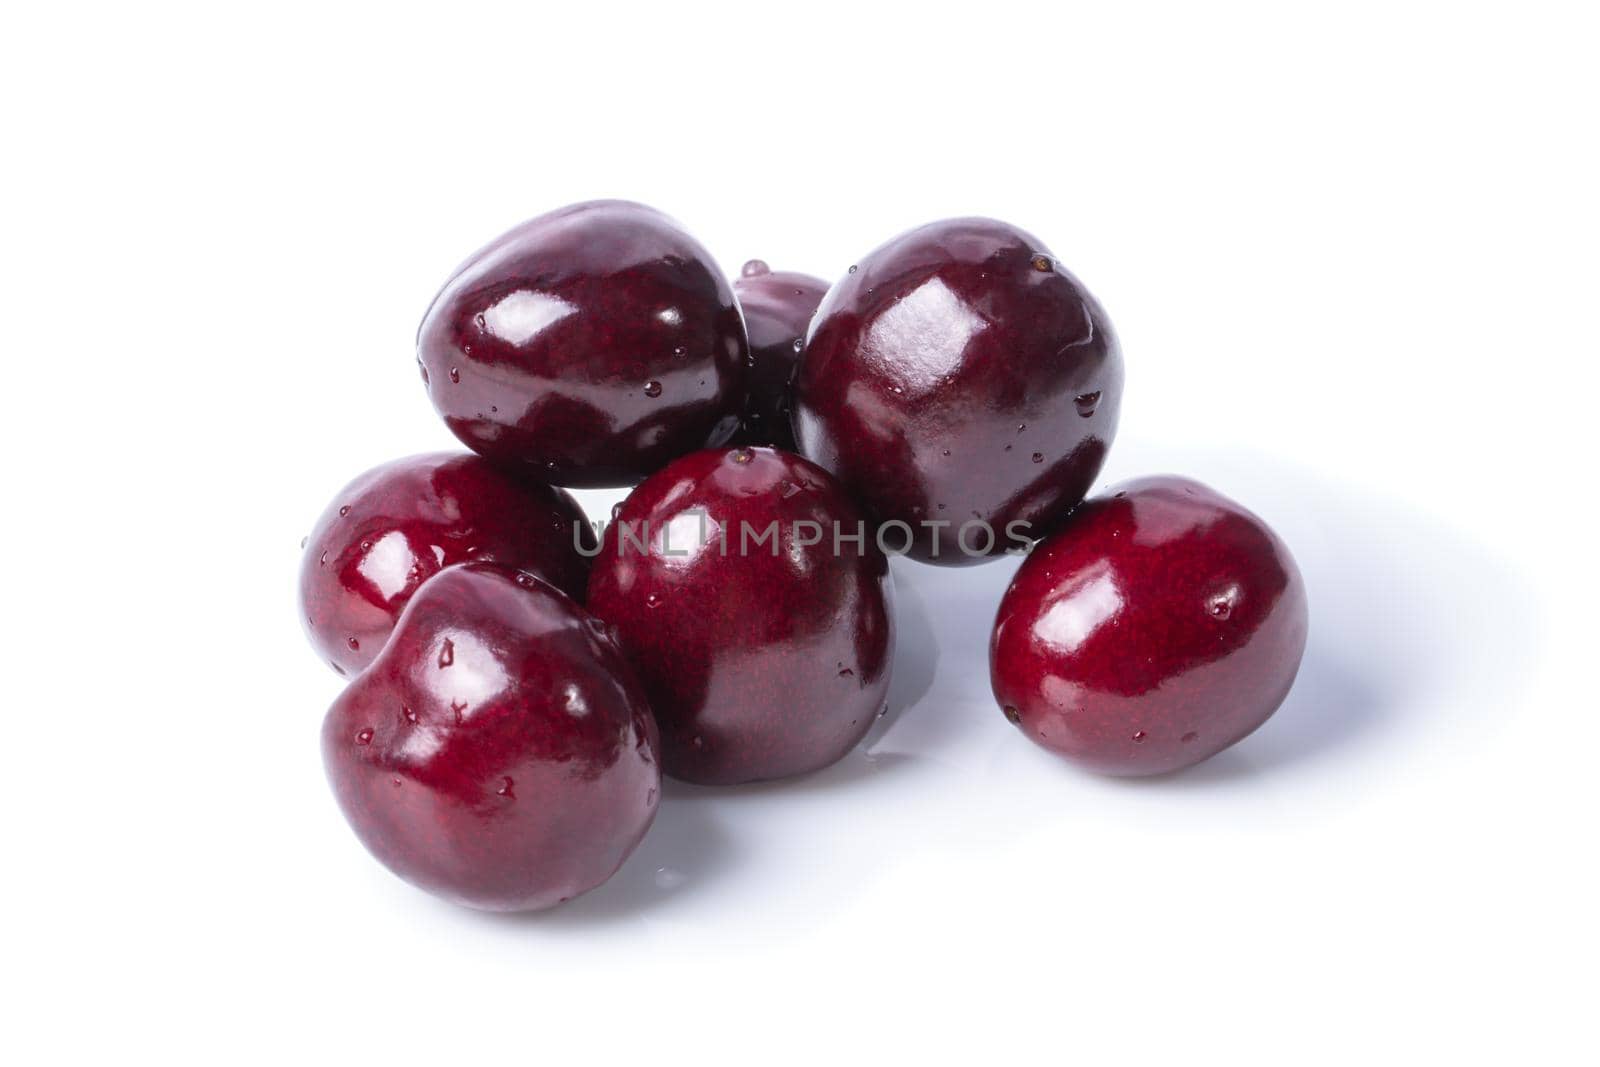 Some sweet cherry berries isolated on white background